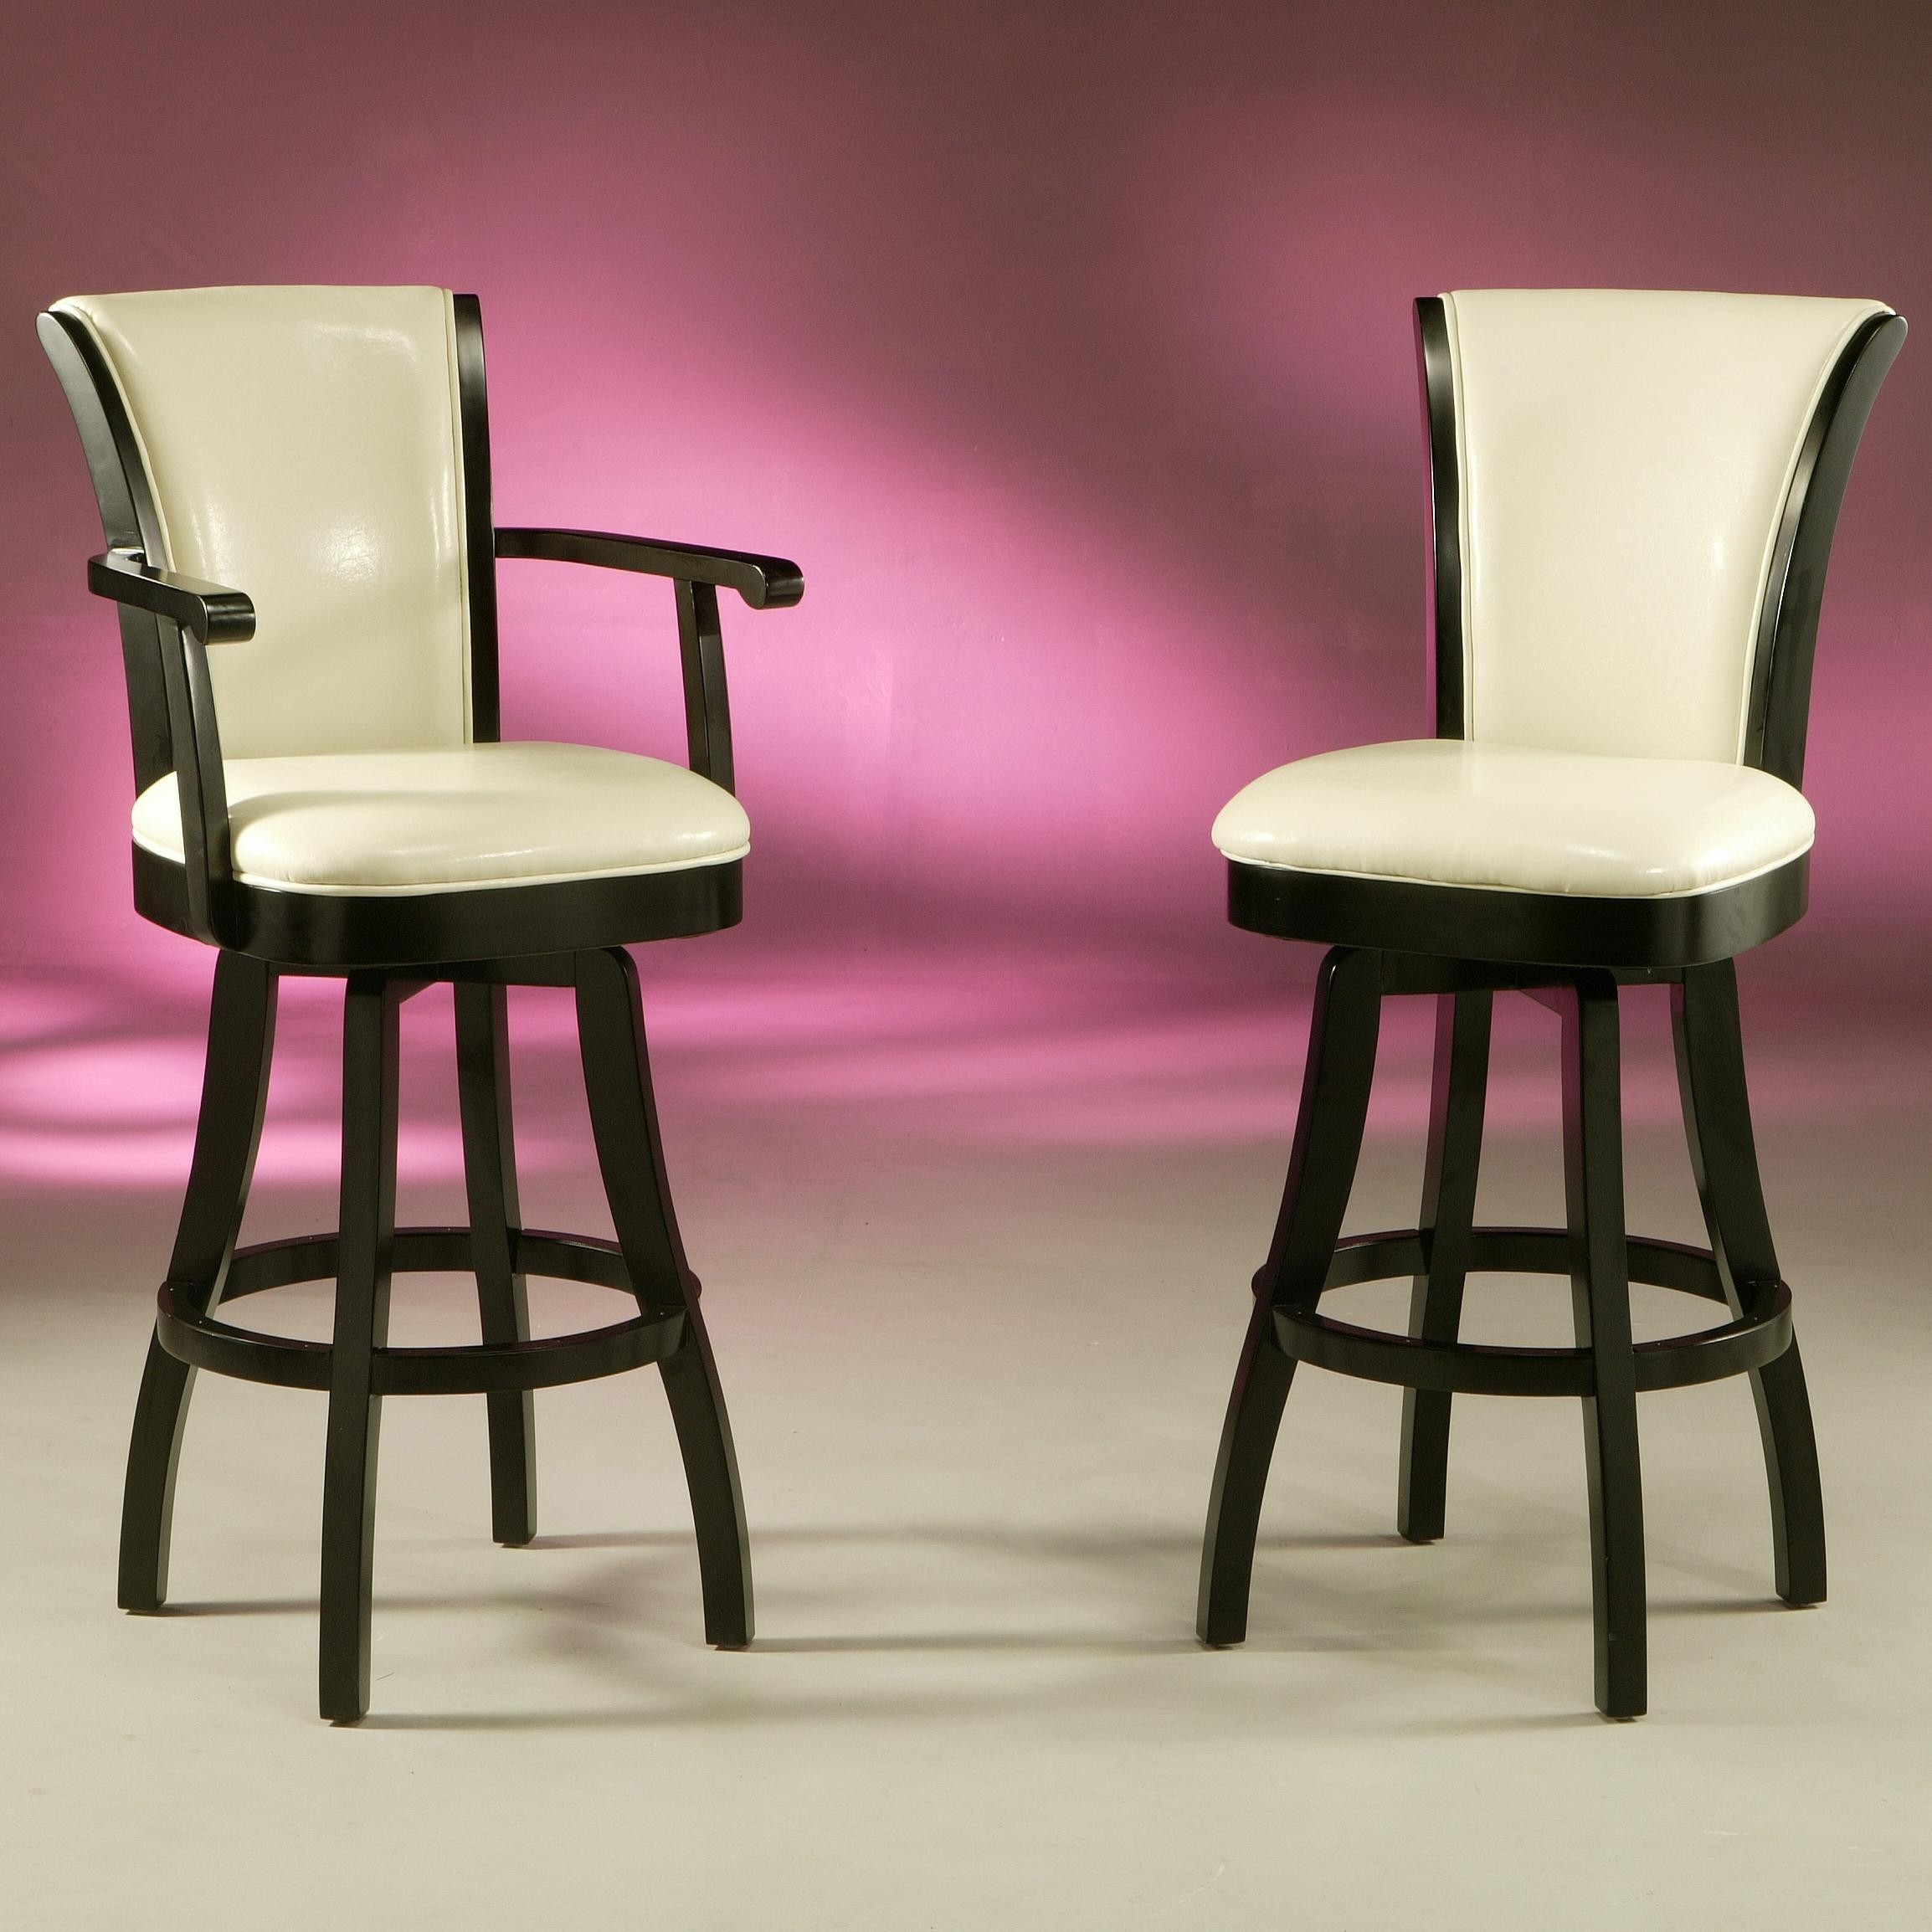 Bar stools with backs and arms and swivels 1